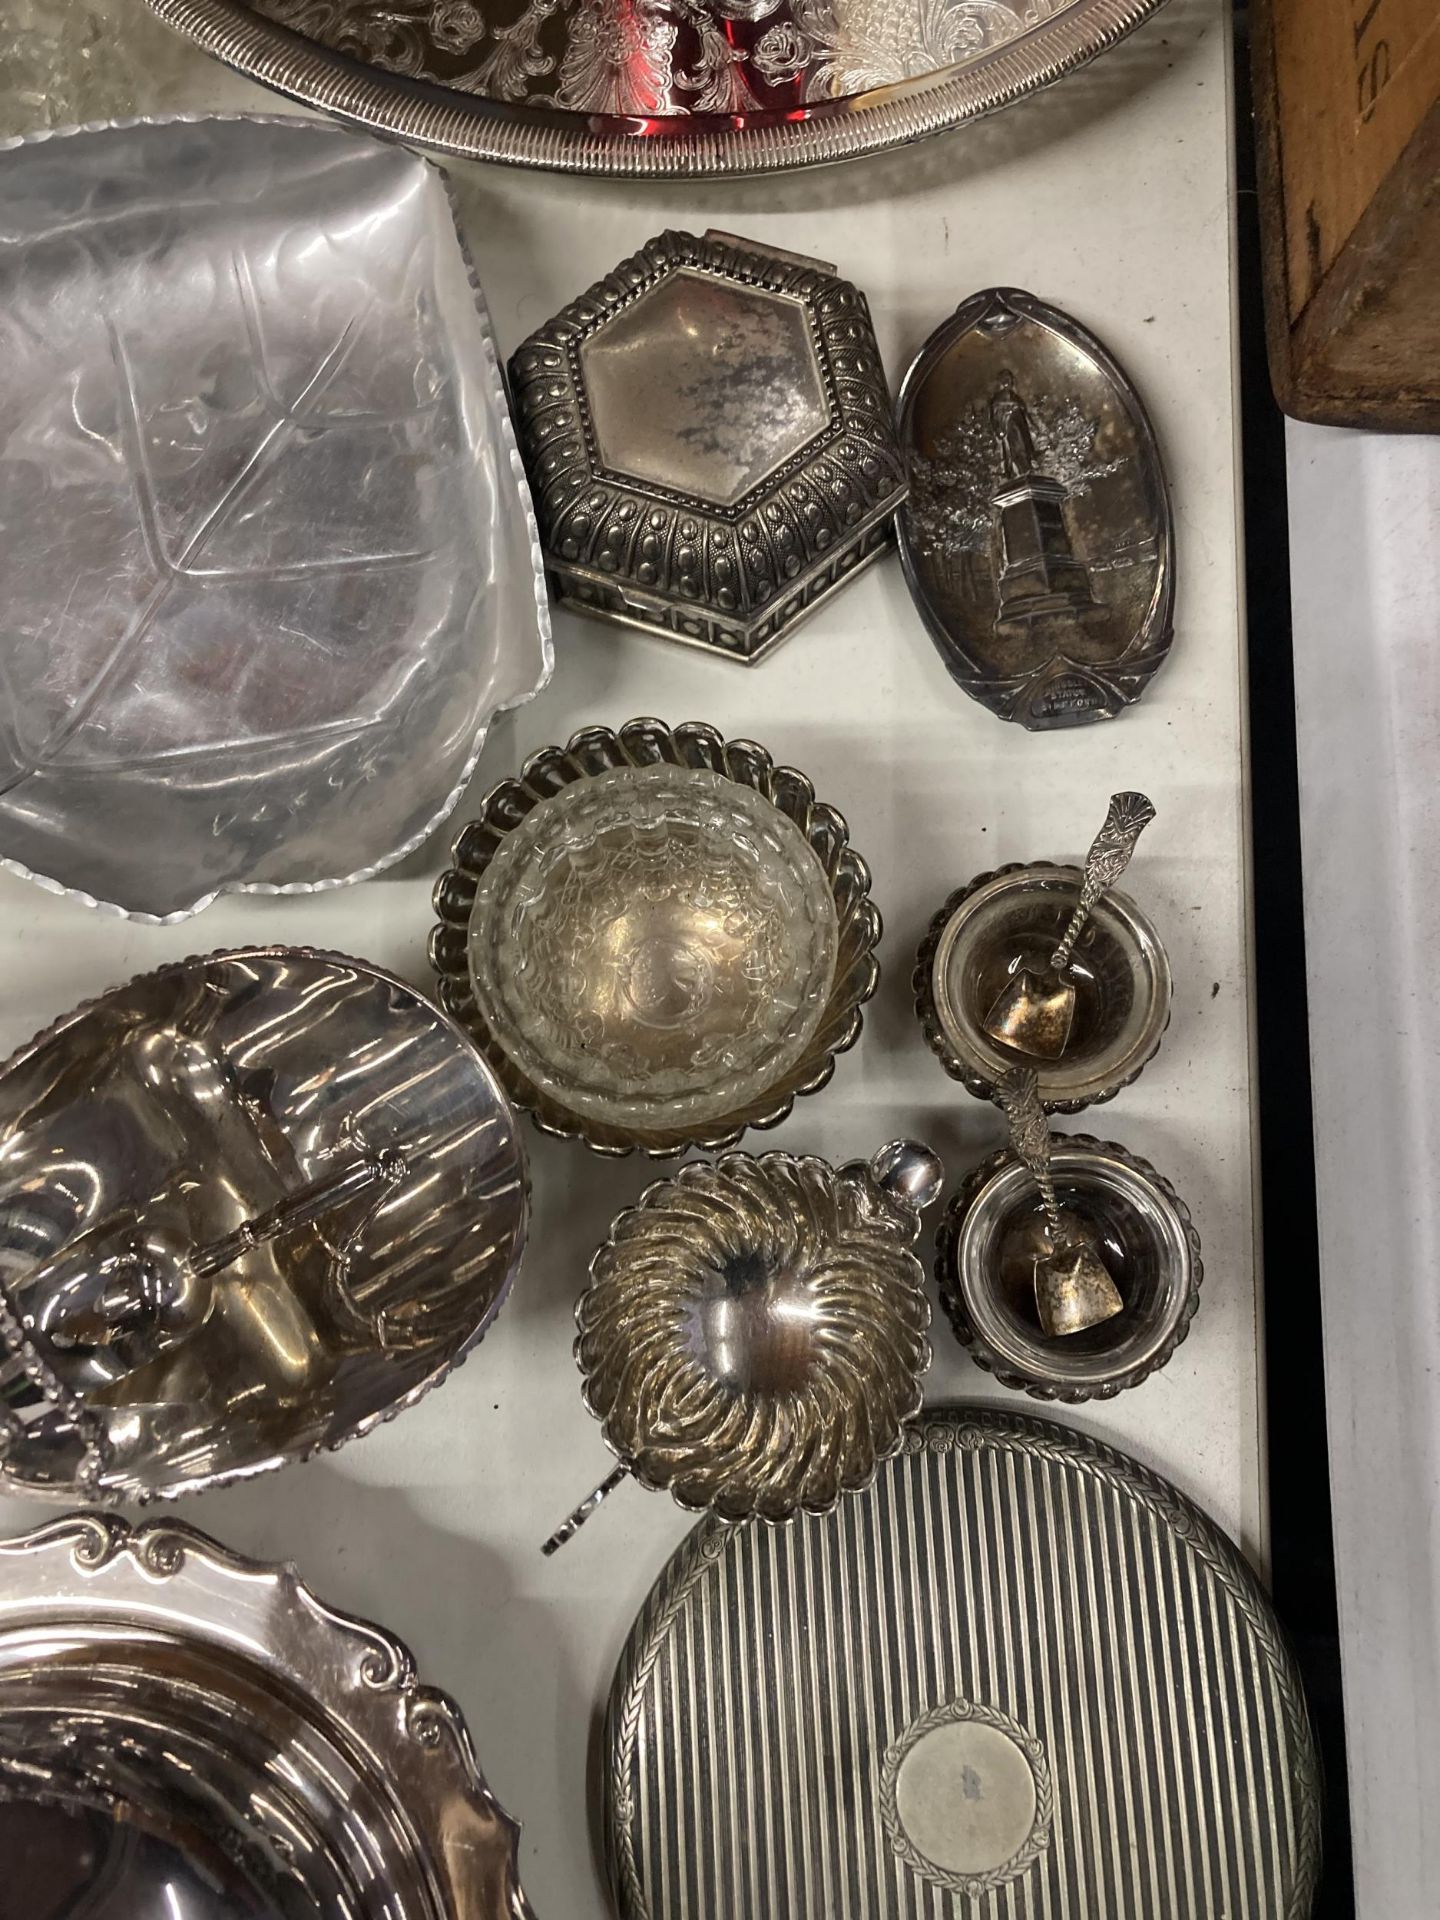 A LARGE QUANTITY OF SILVER PLATE TO INCLUDE A BUTTER DISH, MIRROR, FLOUR SHAKER, TRAY, NAPKINS, - Image 4 of 6